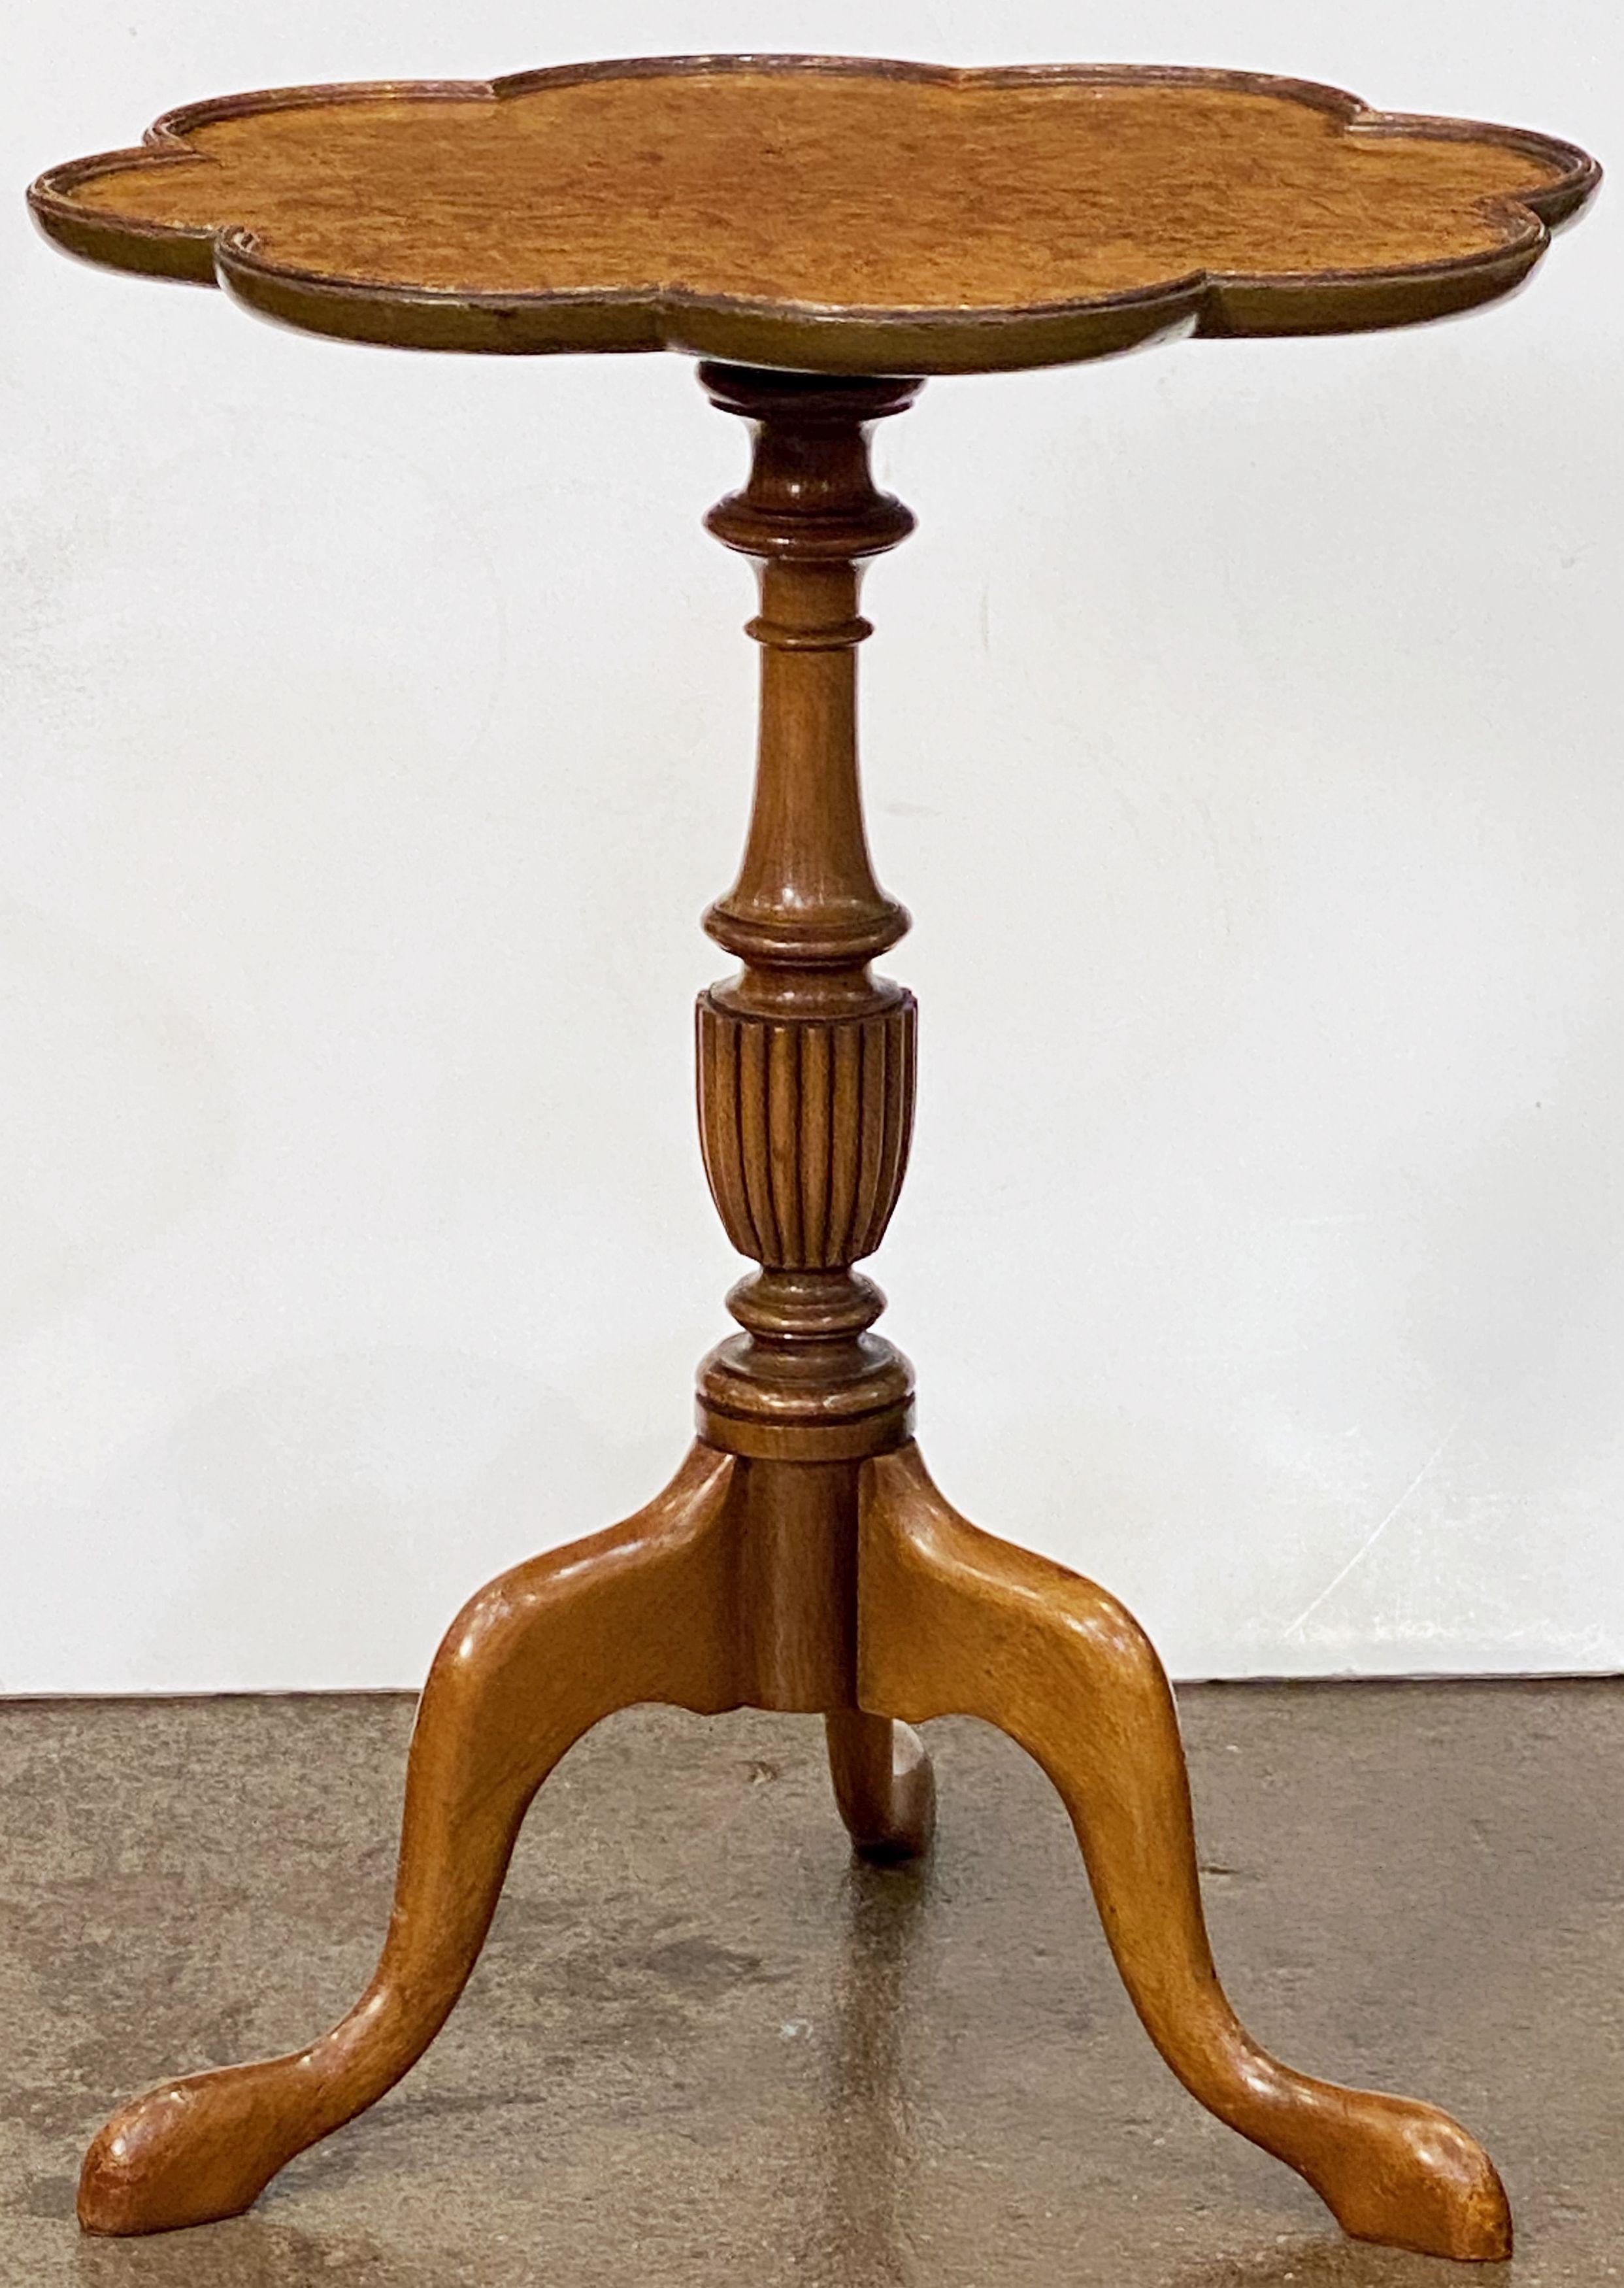 A fine English wine or cocktail table of burled walnut - featuring a raised edge around the circumference of the scalloped, moulded top, mounted upon a turned column pedestal with tripod base.

An excellent choice as a side table or for serving.